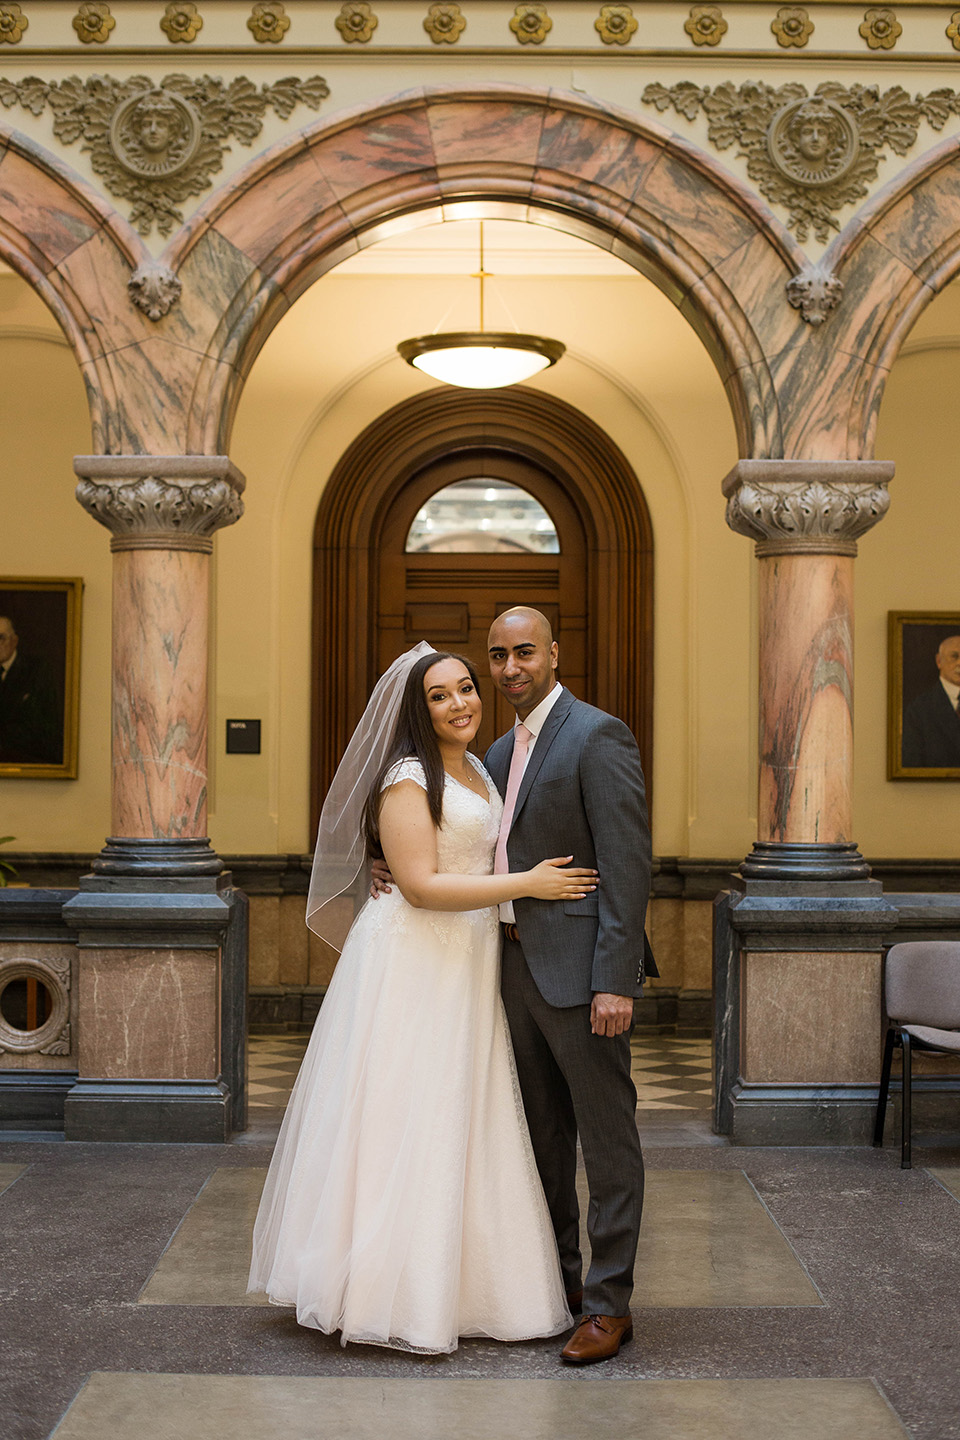 courthouse elopement in Cincinnati OH, bride and groom photo 